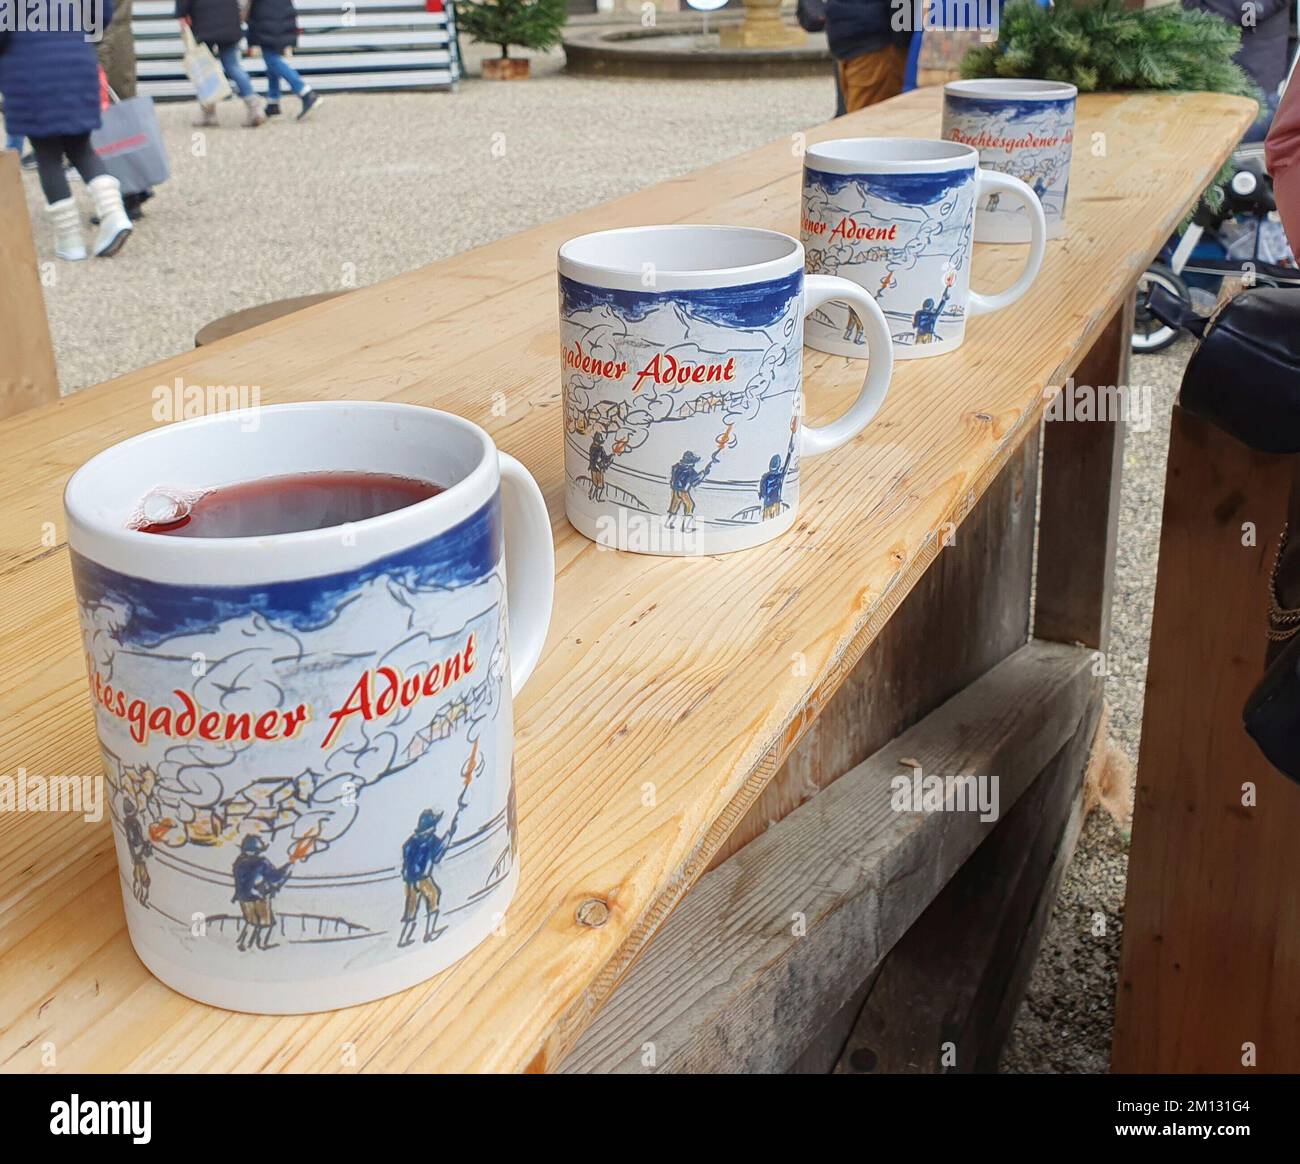 Berchtesgaden Advent, Christmas market, mulled wine stand, cups